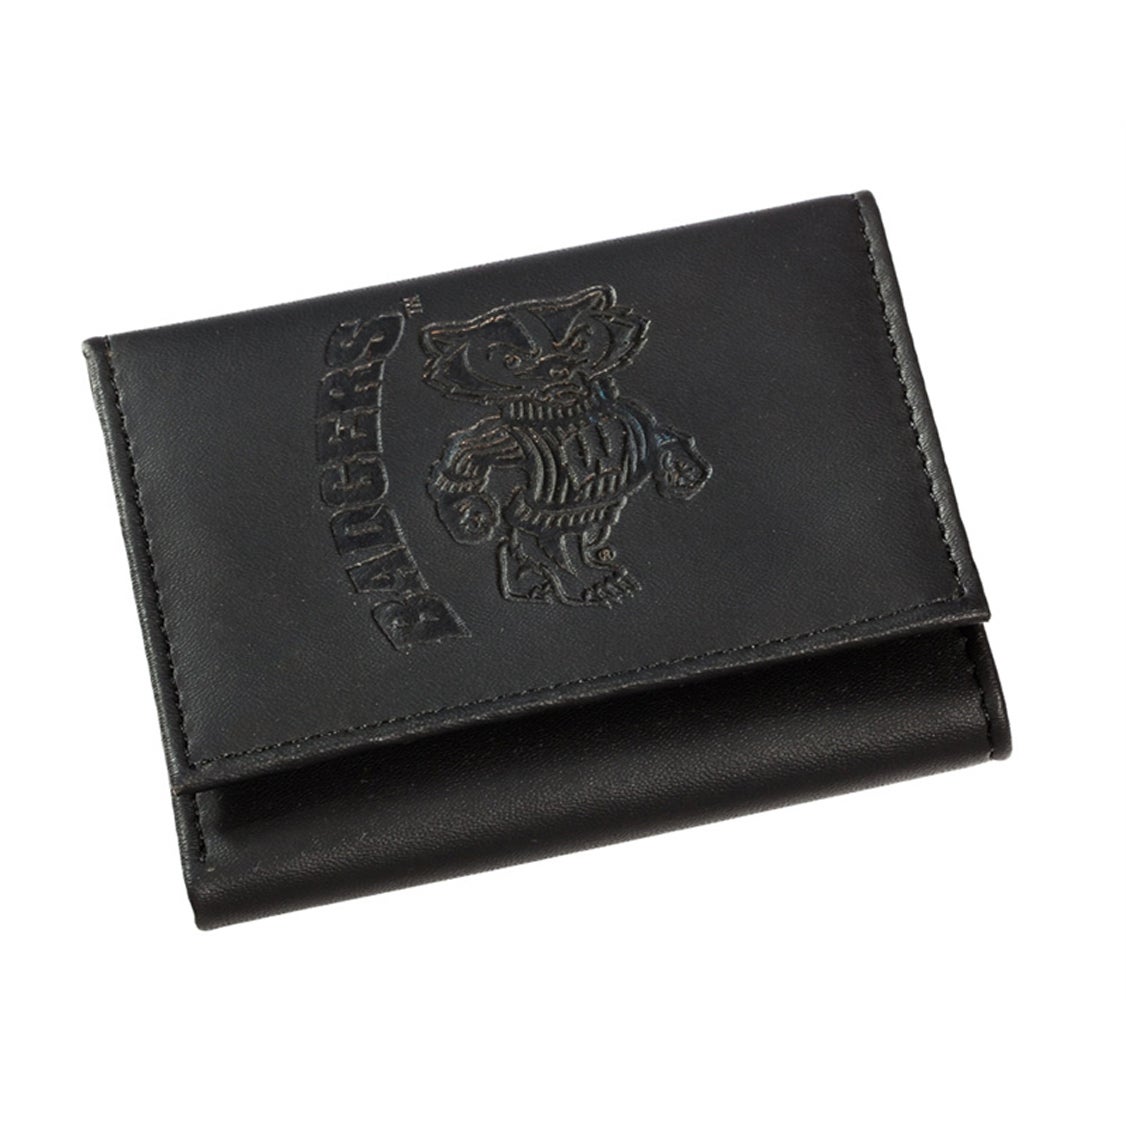 University of Wisconsin-Madison Tri-Fold Leather Wallet